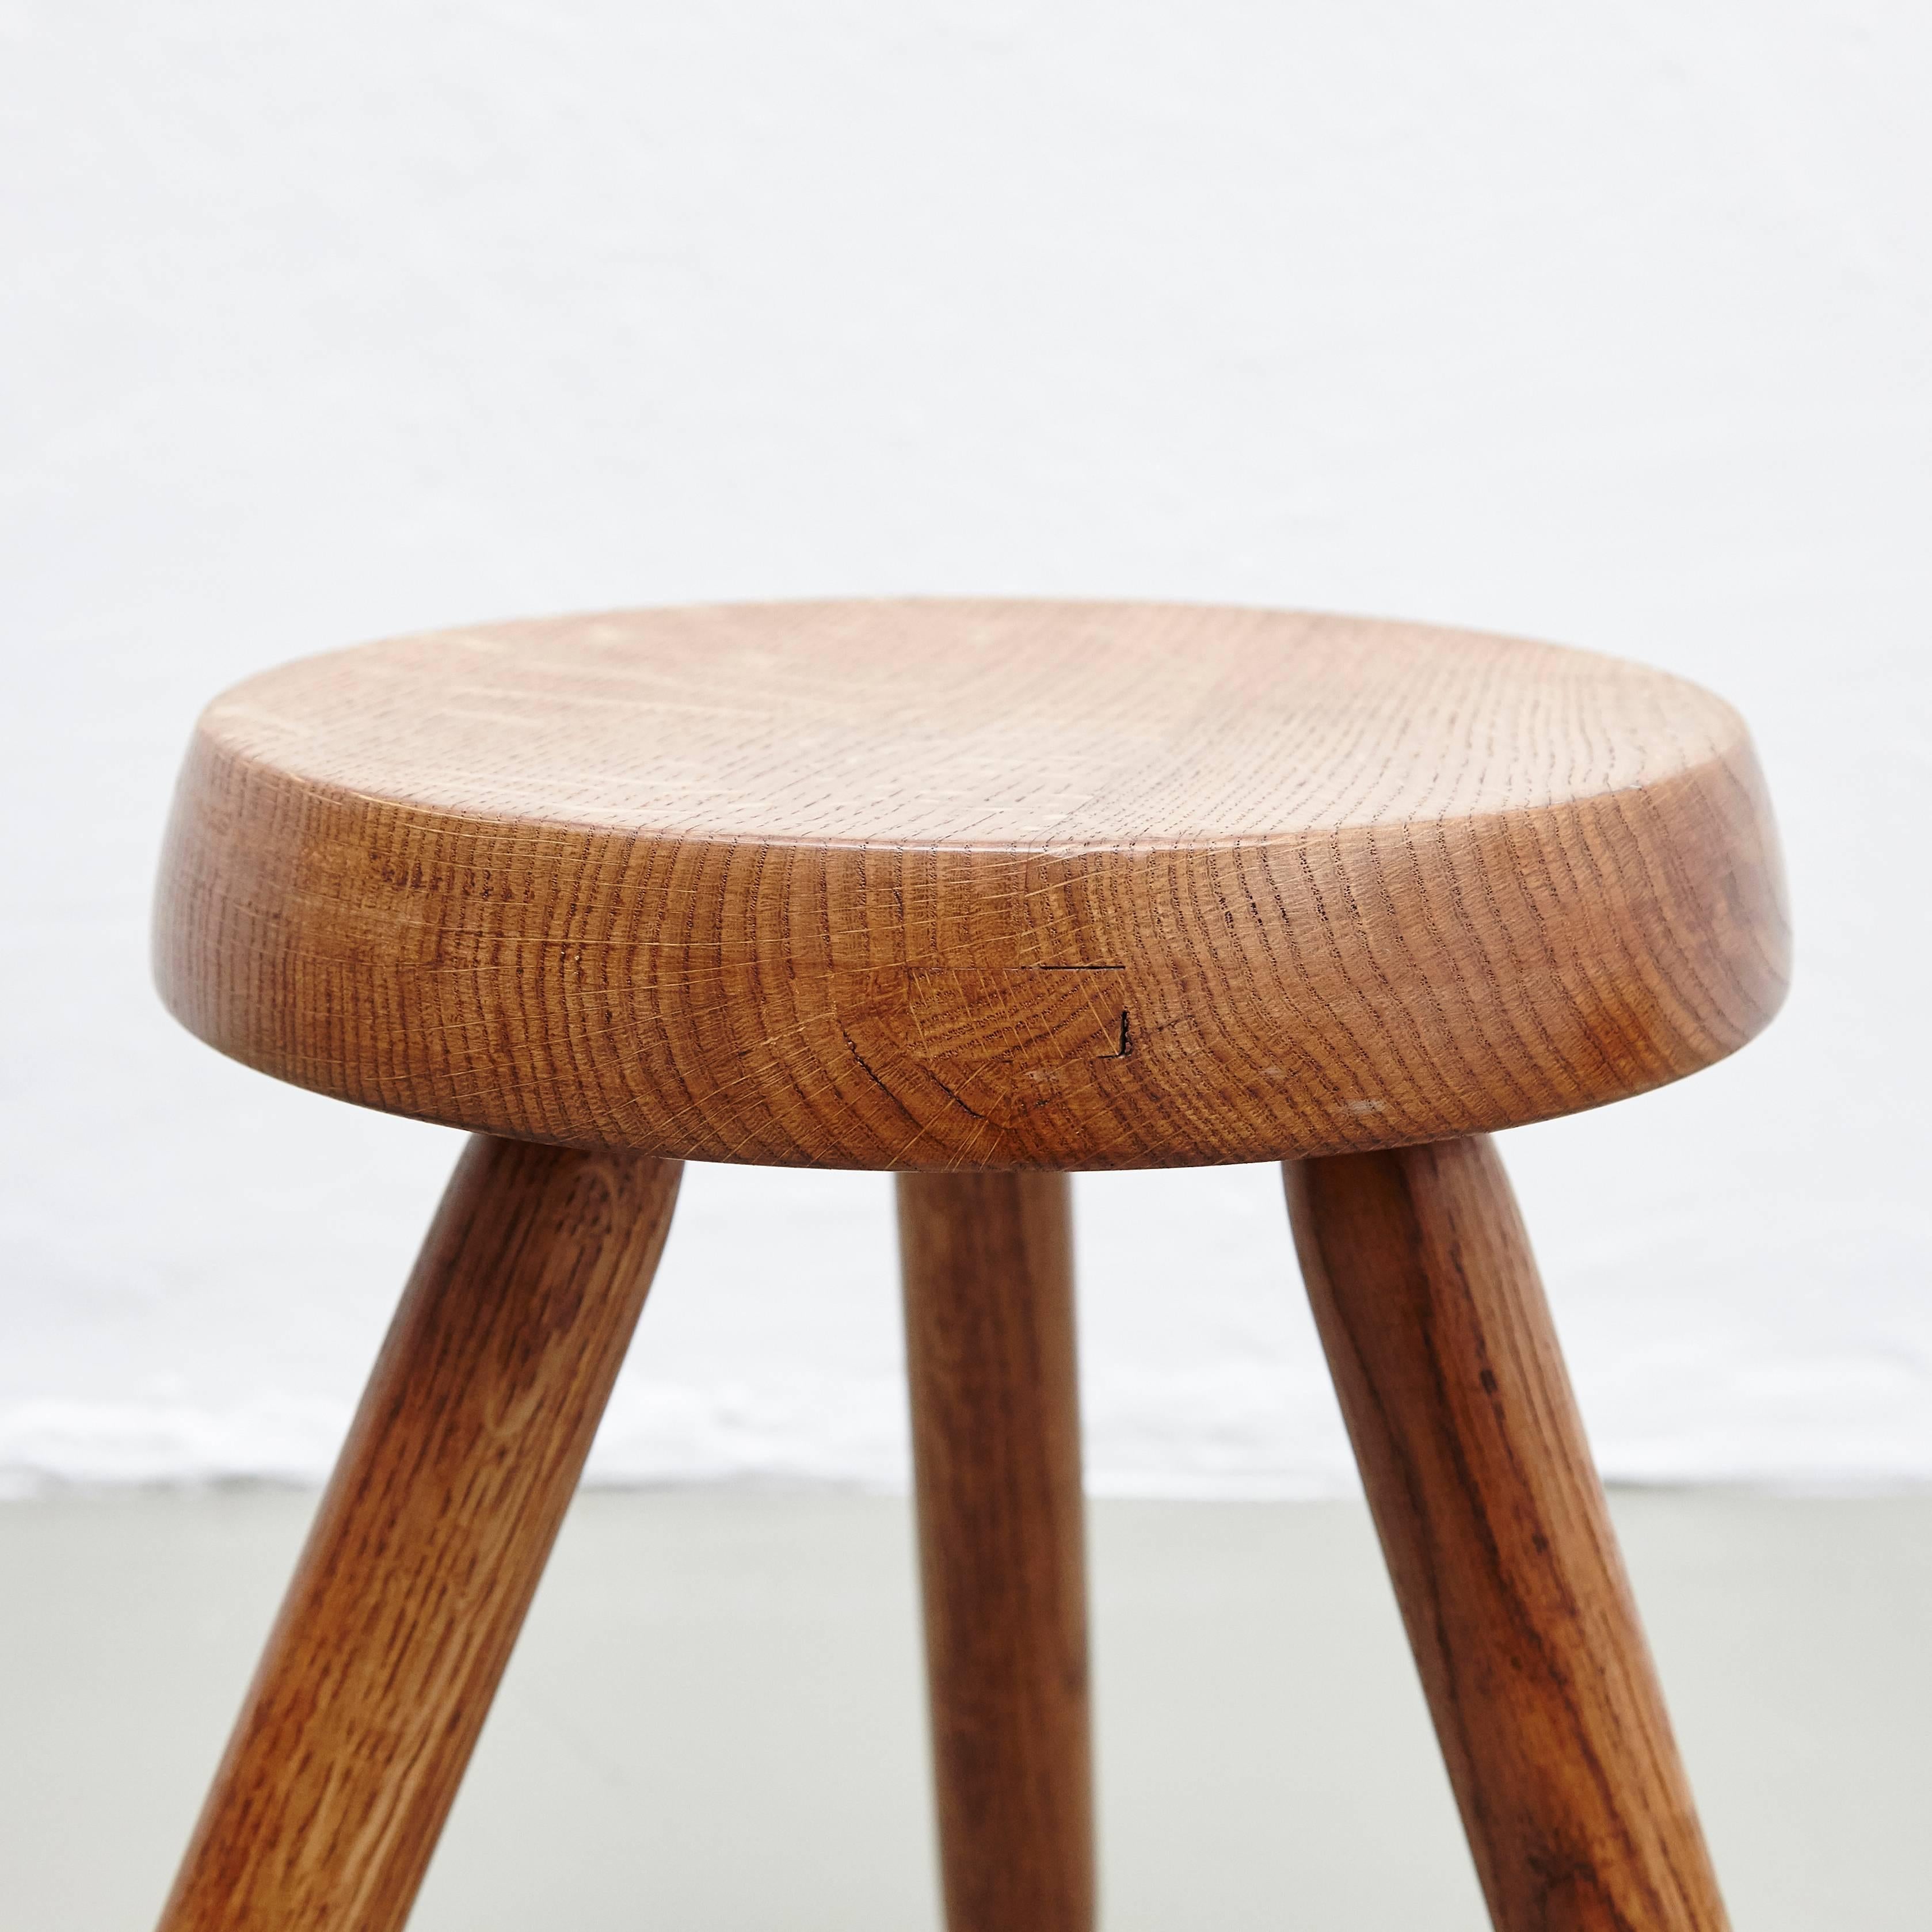 Late 20th Century After Charlotte Perriand, Mid Century Modern, Oak Stool